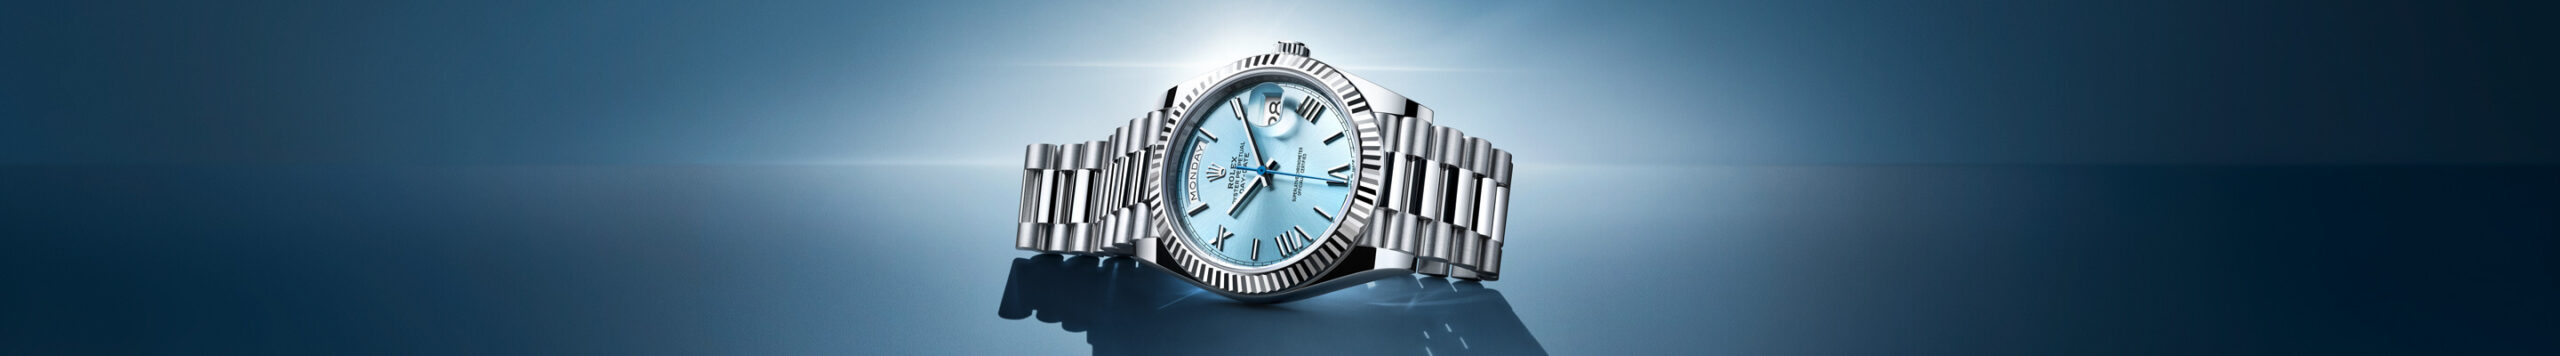 Luxury wristwatch with a metallic band and detailed face, highlighted by a focused beam of light on a reflective blue surface.